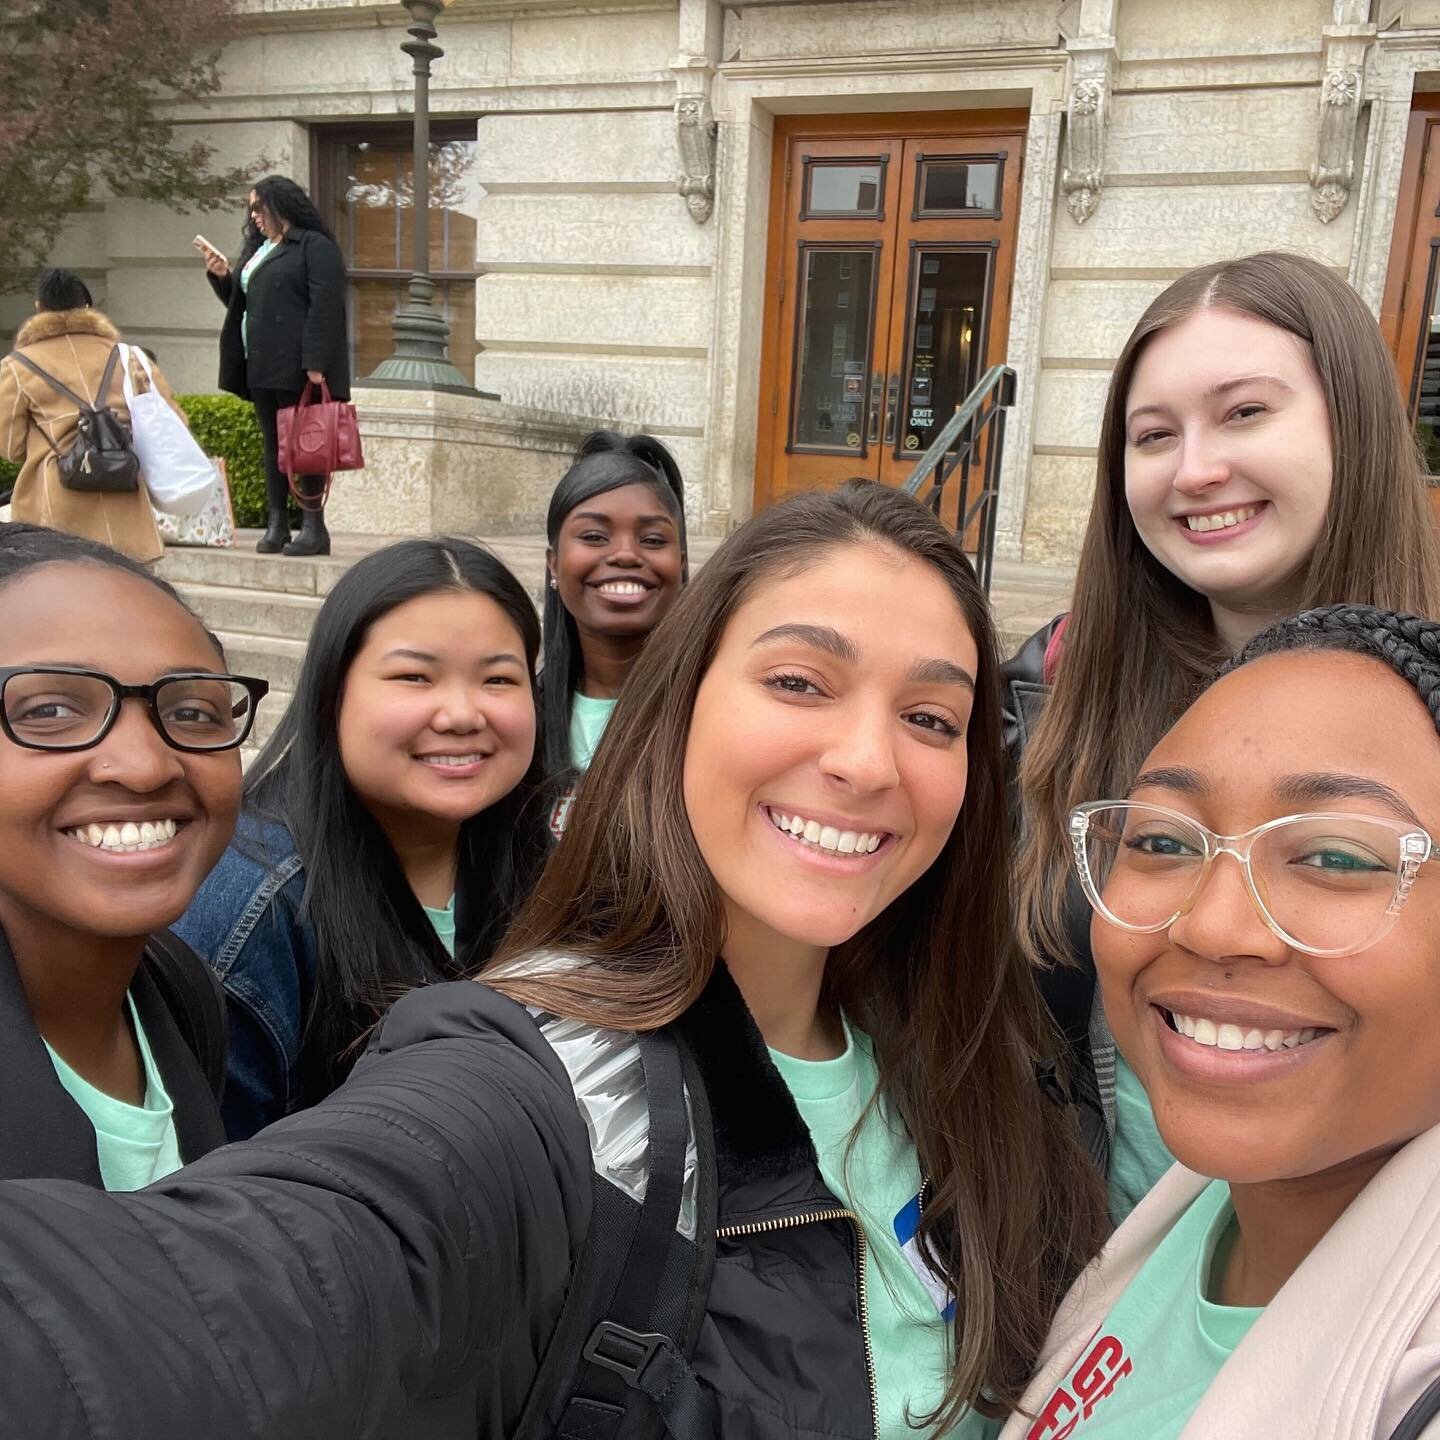 #tbt Our Change Makers descended on the Statehouse last week to meet with legislators about how to protect abortion care and advance Reproductive Justice in Ohio. Thank you to all the leaders and staffers who took the time to meet with this impressiv